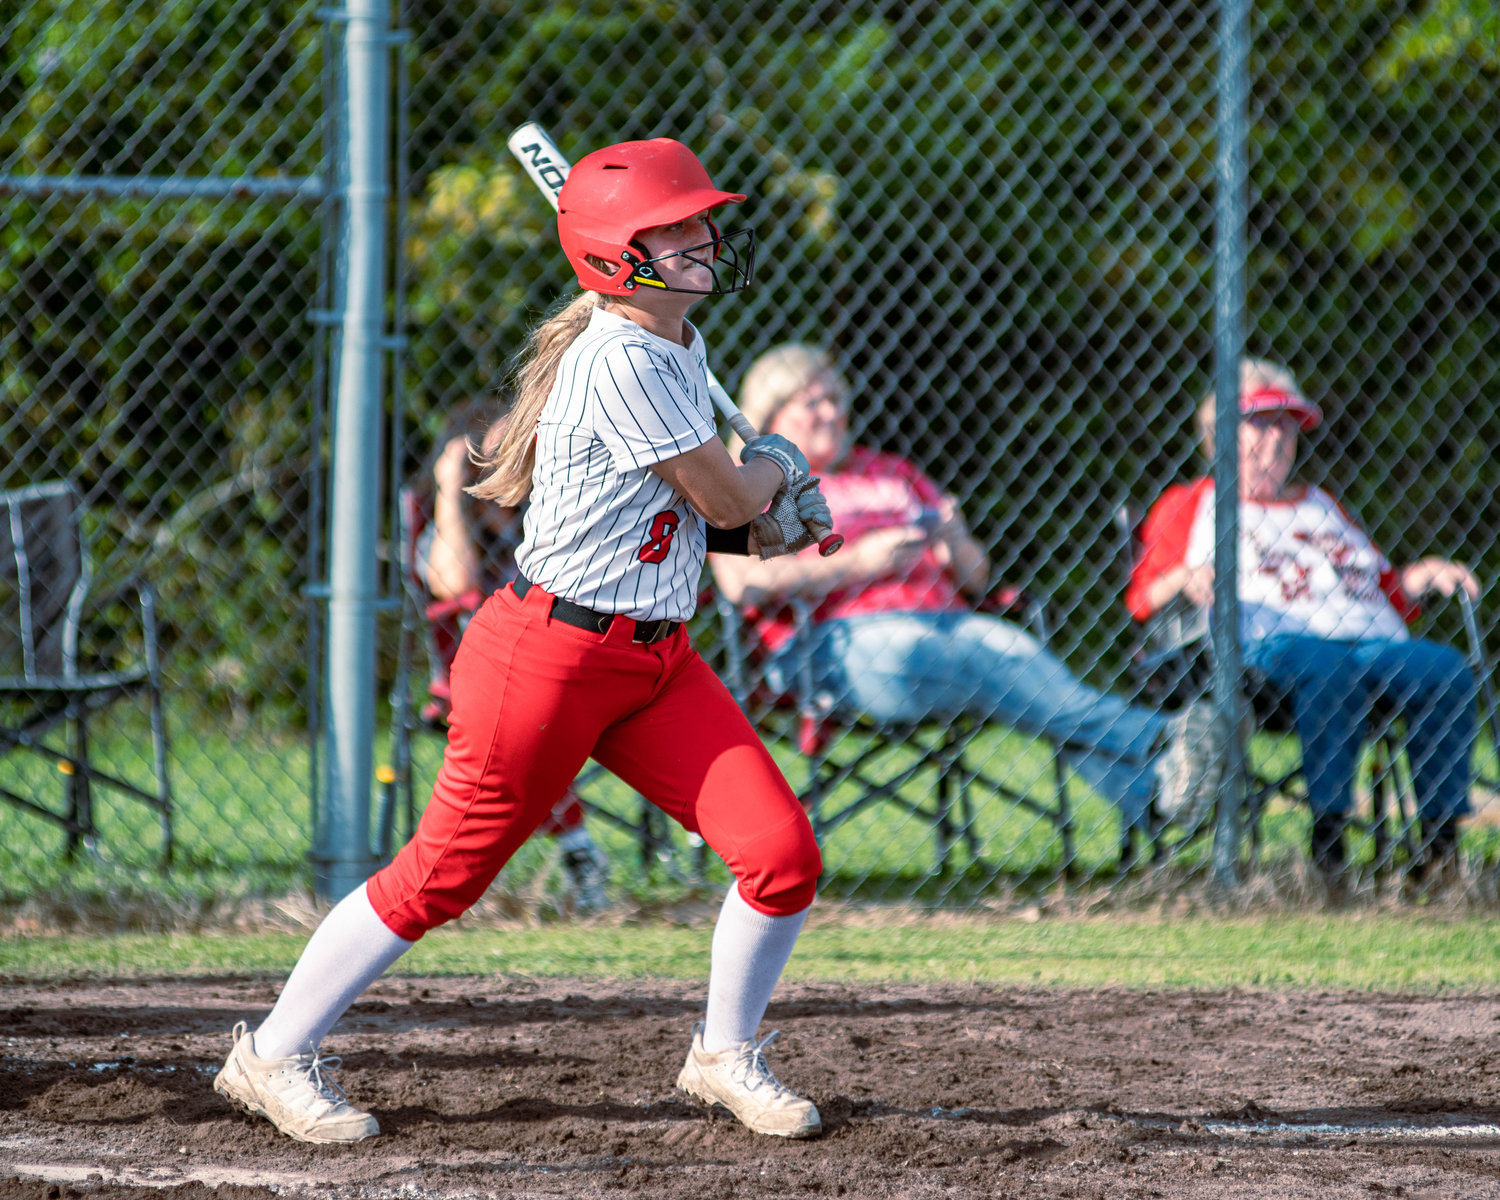 MALLORY JACKSON  went 1 for 3 with three runs, two RBI, and two walks against McGehee. She was also 3 for 4 against Dumas and 2 for 4 against Rison as the Lady Pirates extended their win streak to three games.